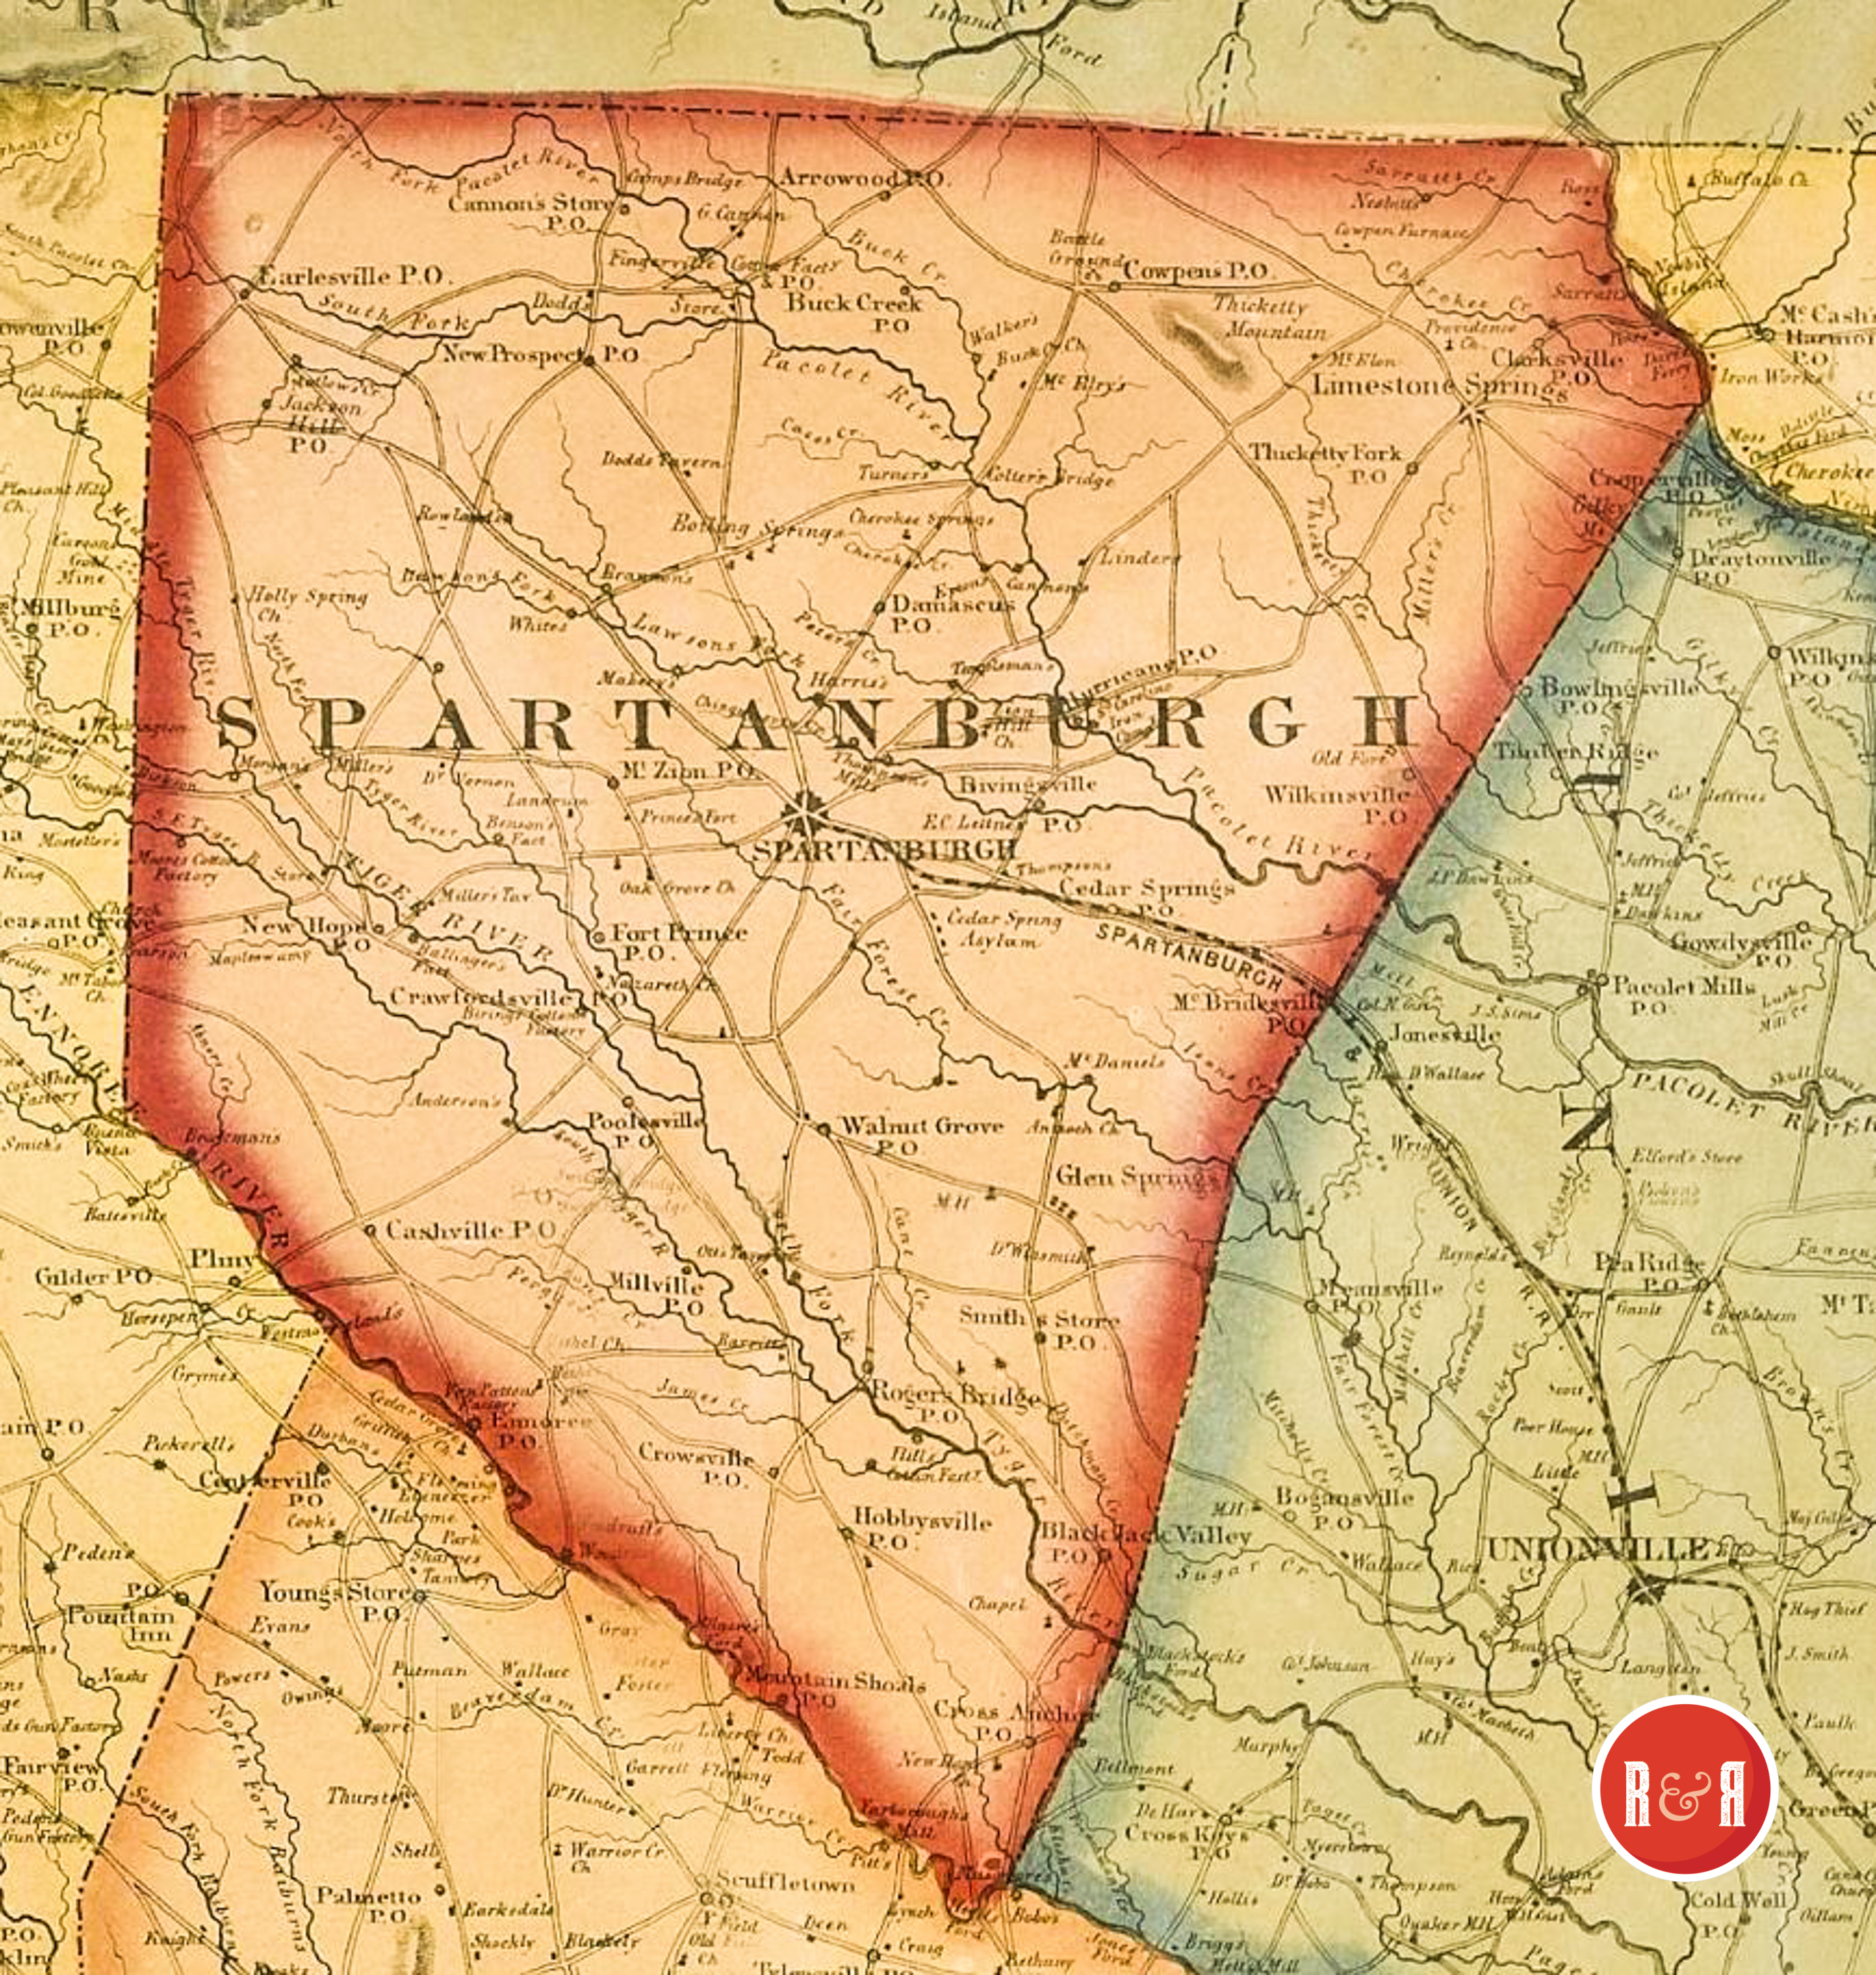 COLTON'S 1854 MAP OF SPARTANBURG COUNTY - ENLARGEMENT